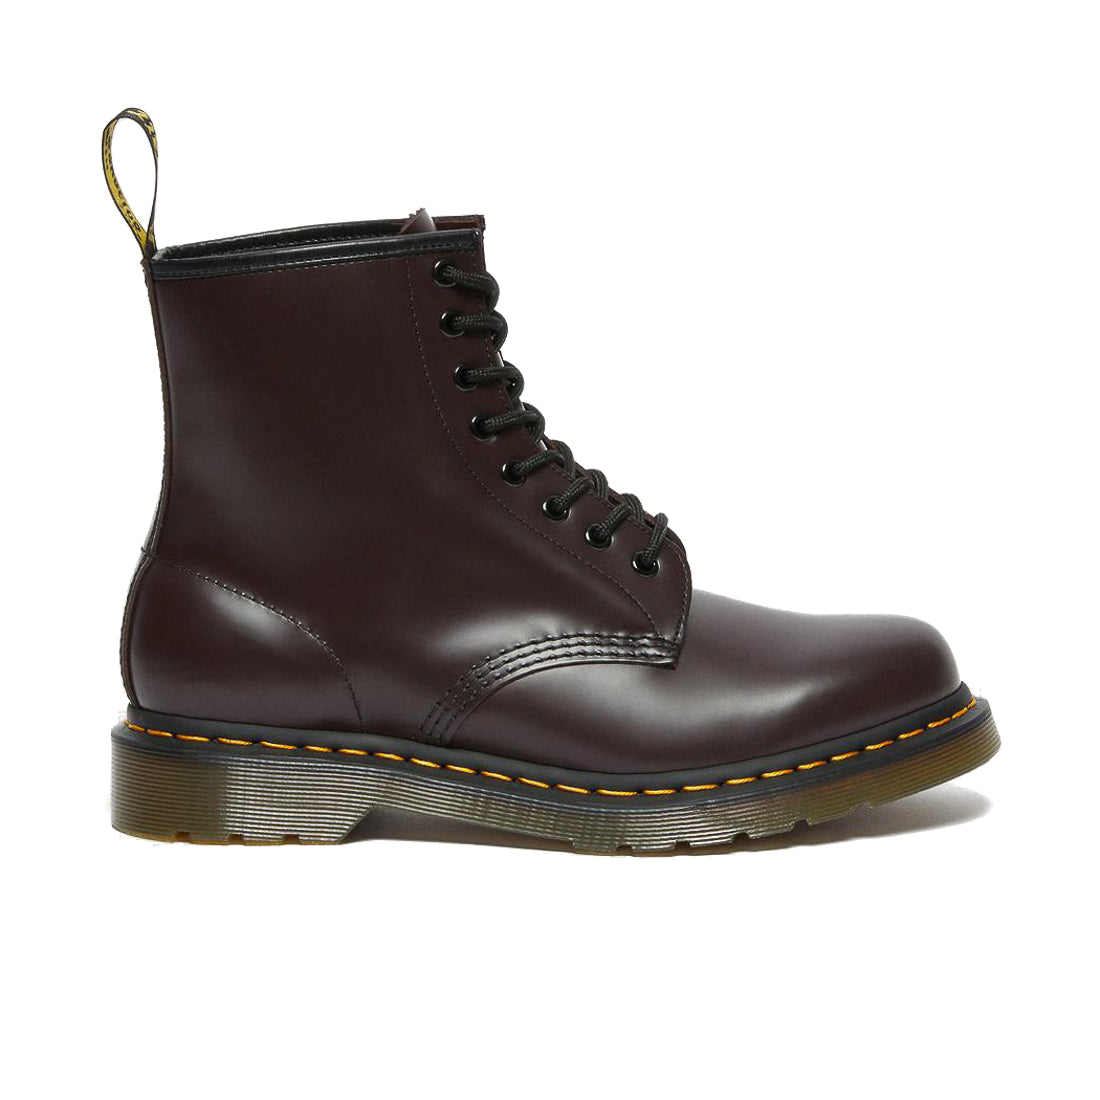 Dr. Marten 1460 Leather Lace Up Boots 'Burgundy'